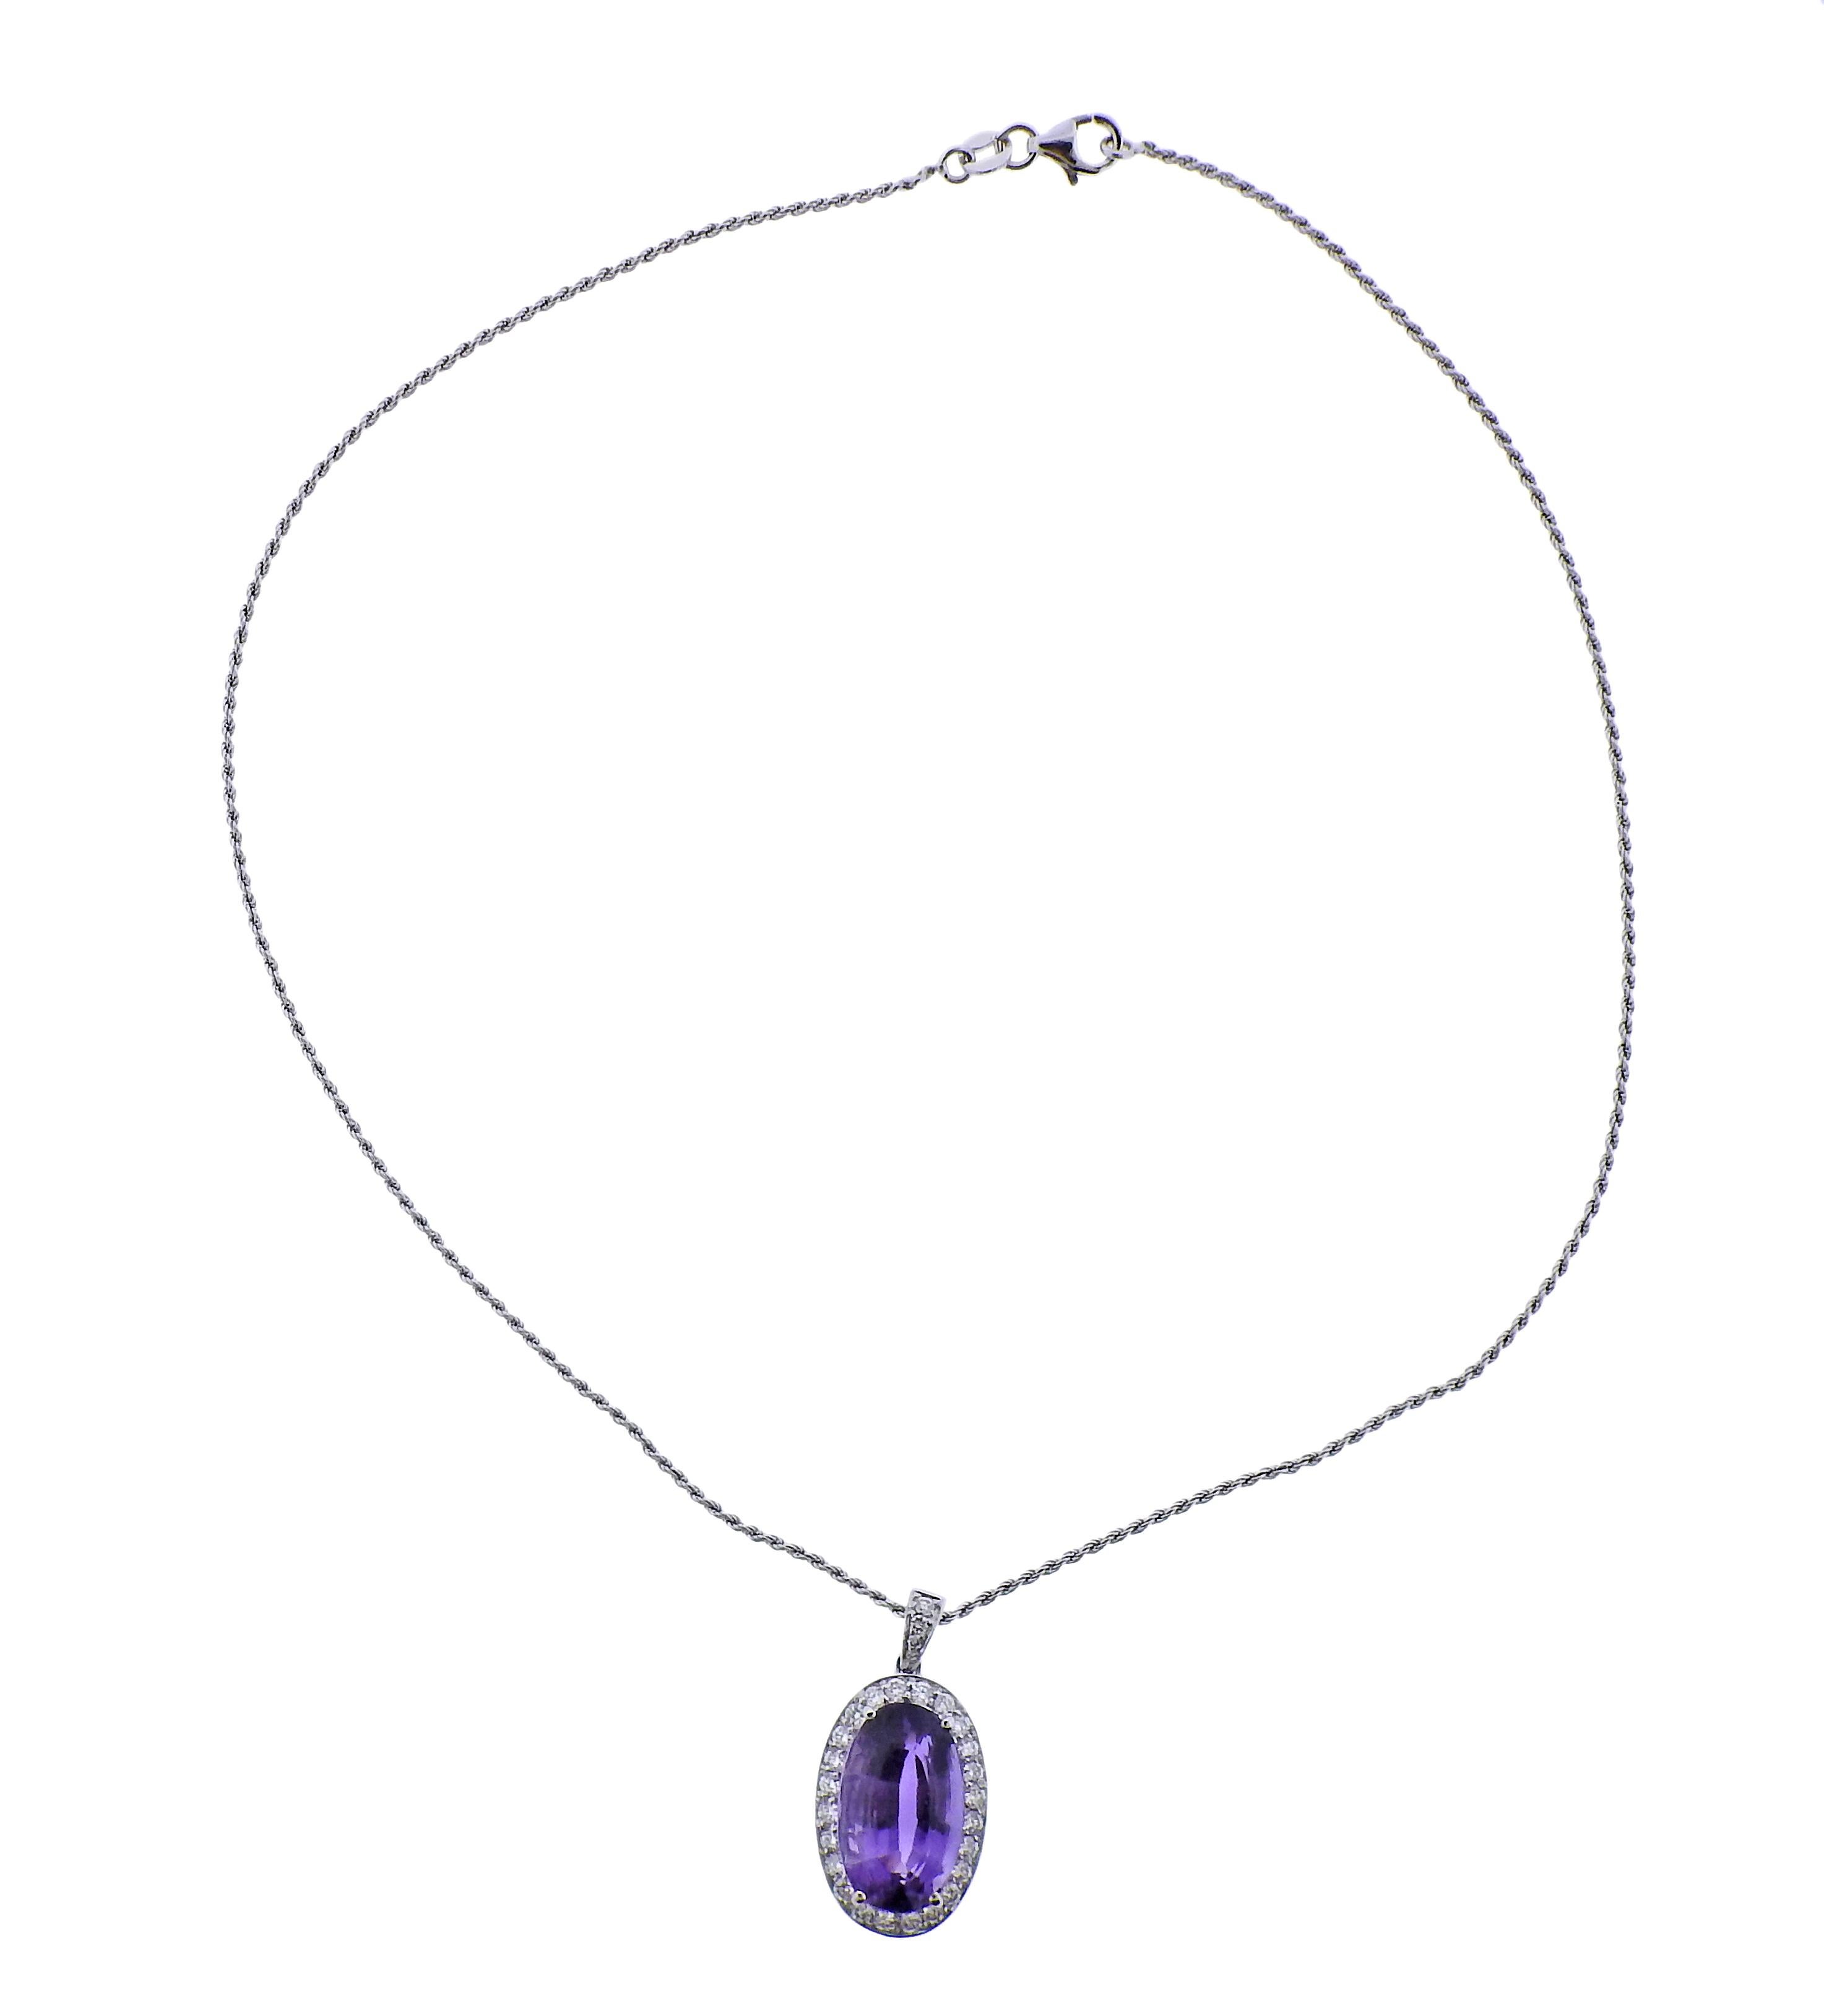 18k gold chain necklace with pendant. Set with oval 16.4 x 10.9 x 9.3mm amethyst, surrounded with approx. 0.52ctw in diamonds.  Necklace is 16